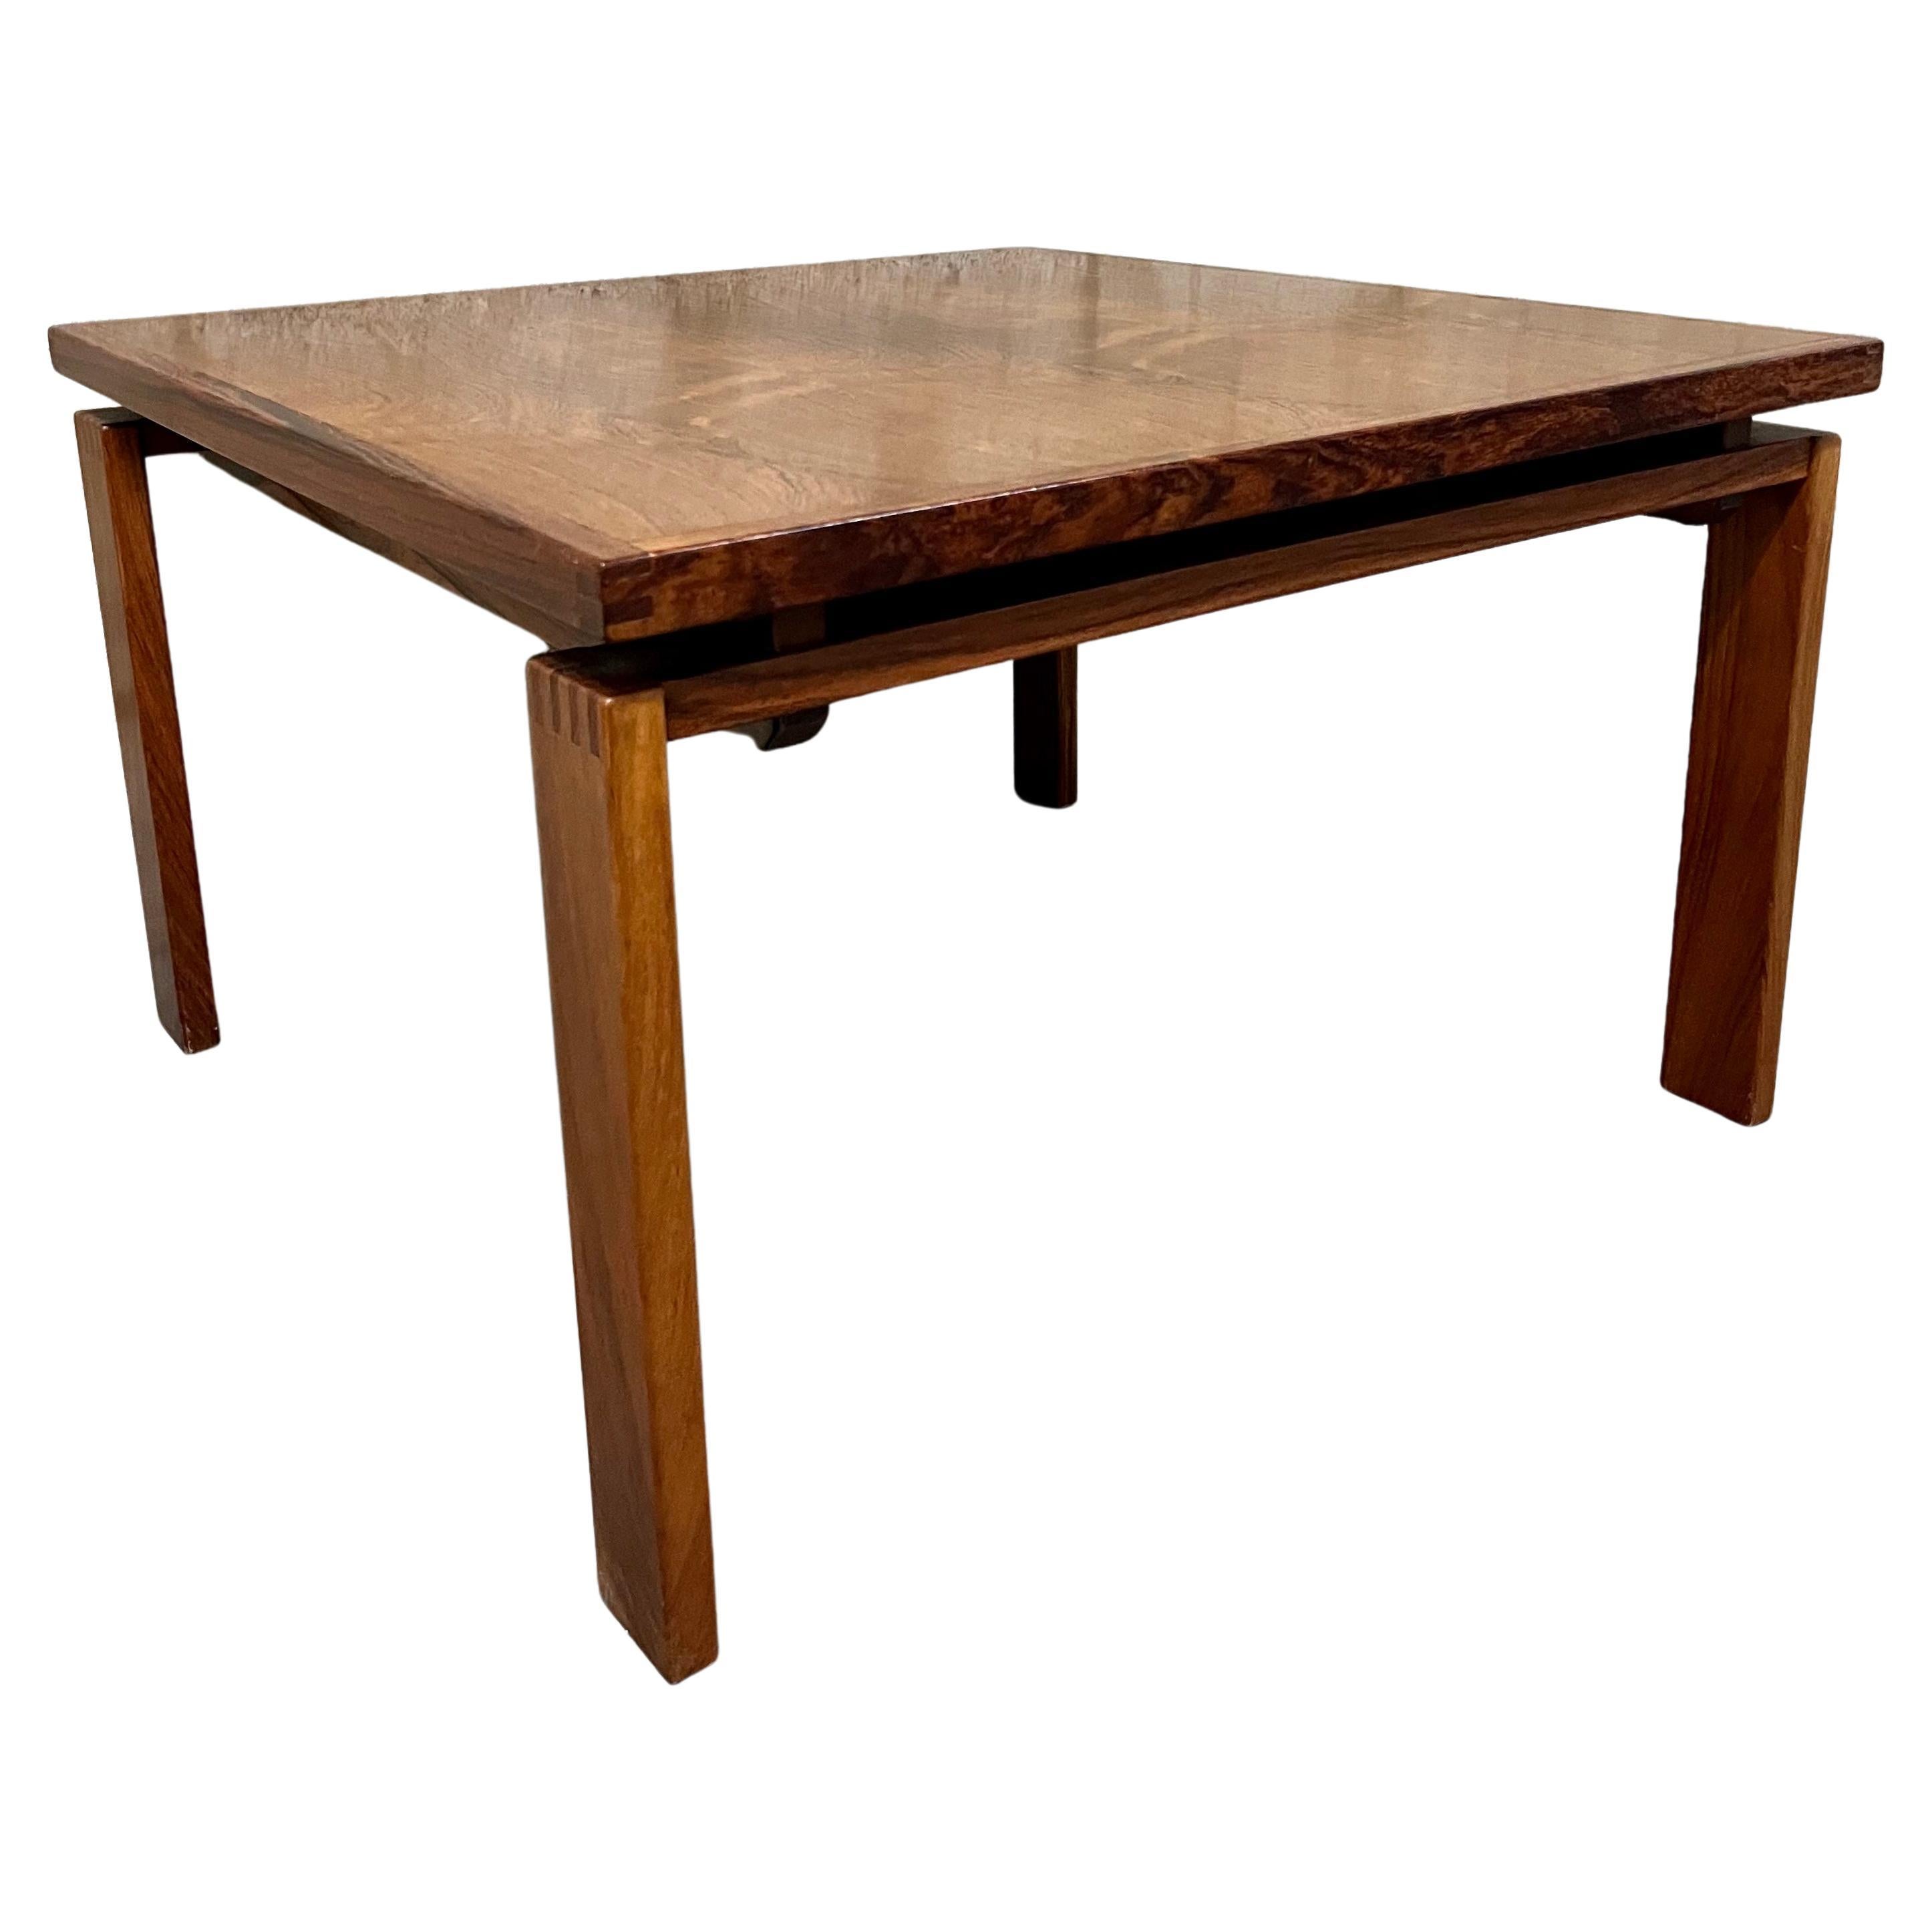 1970s Danish Mid Century Modern Floating Coffee Table in the Jens Risom's Style  For Sale